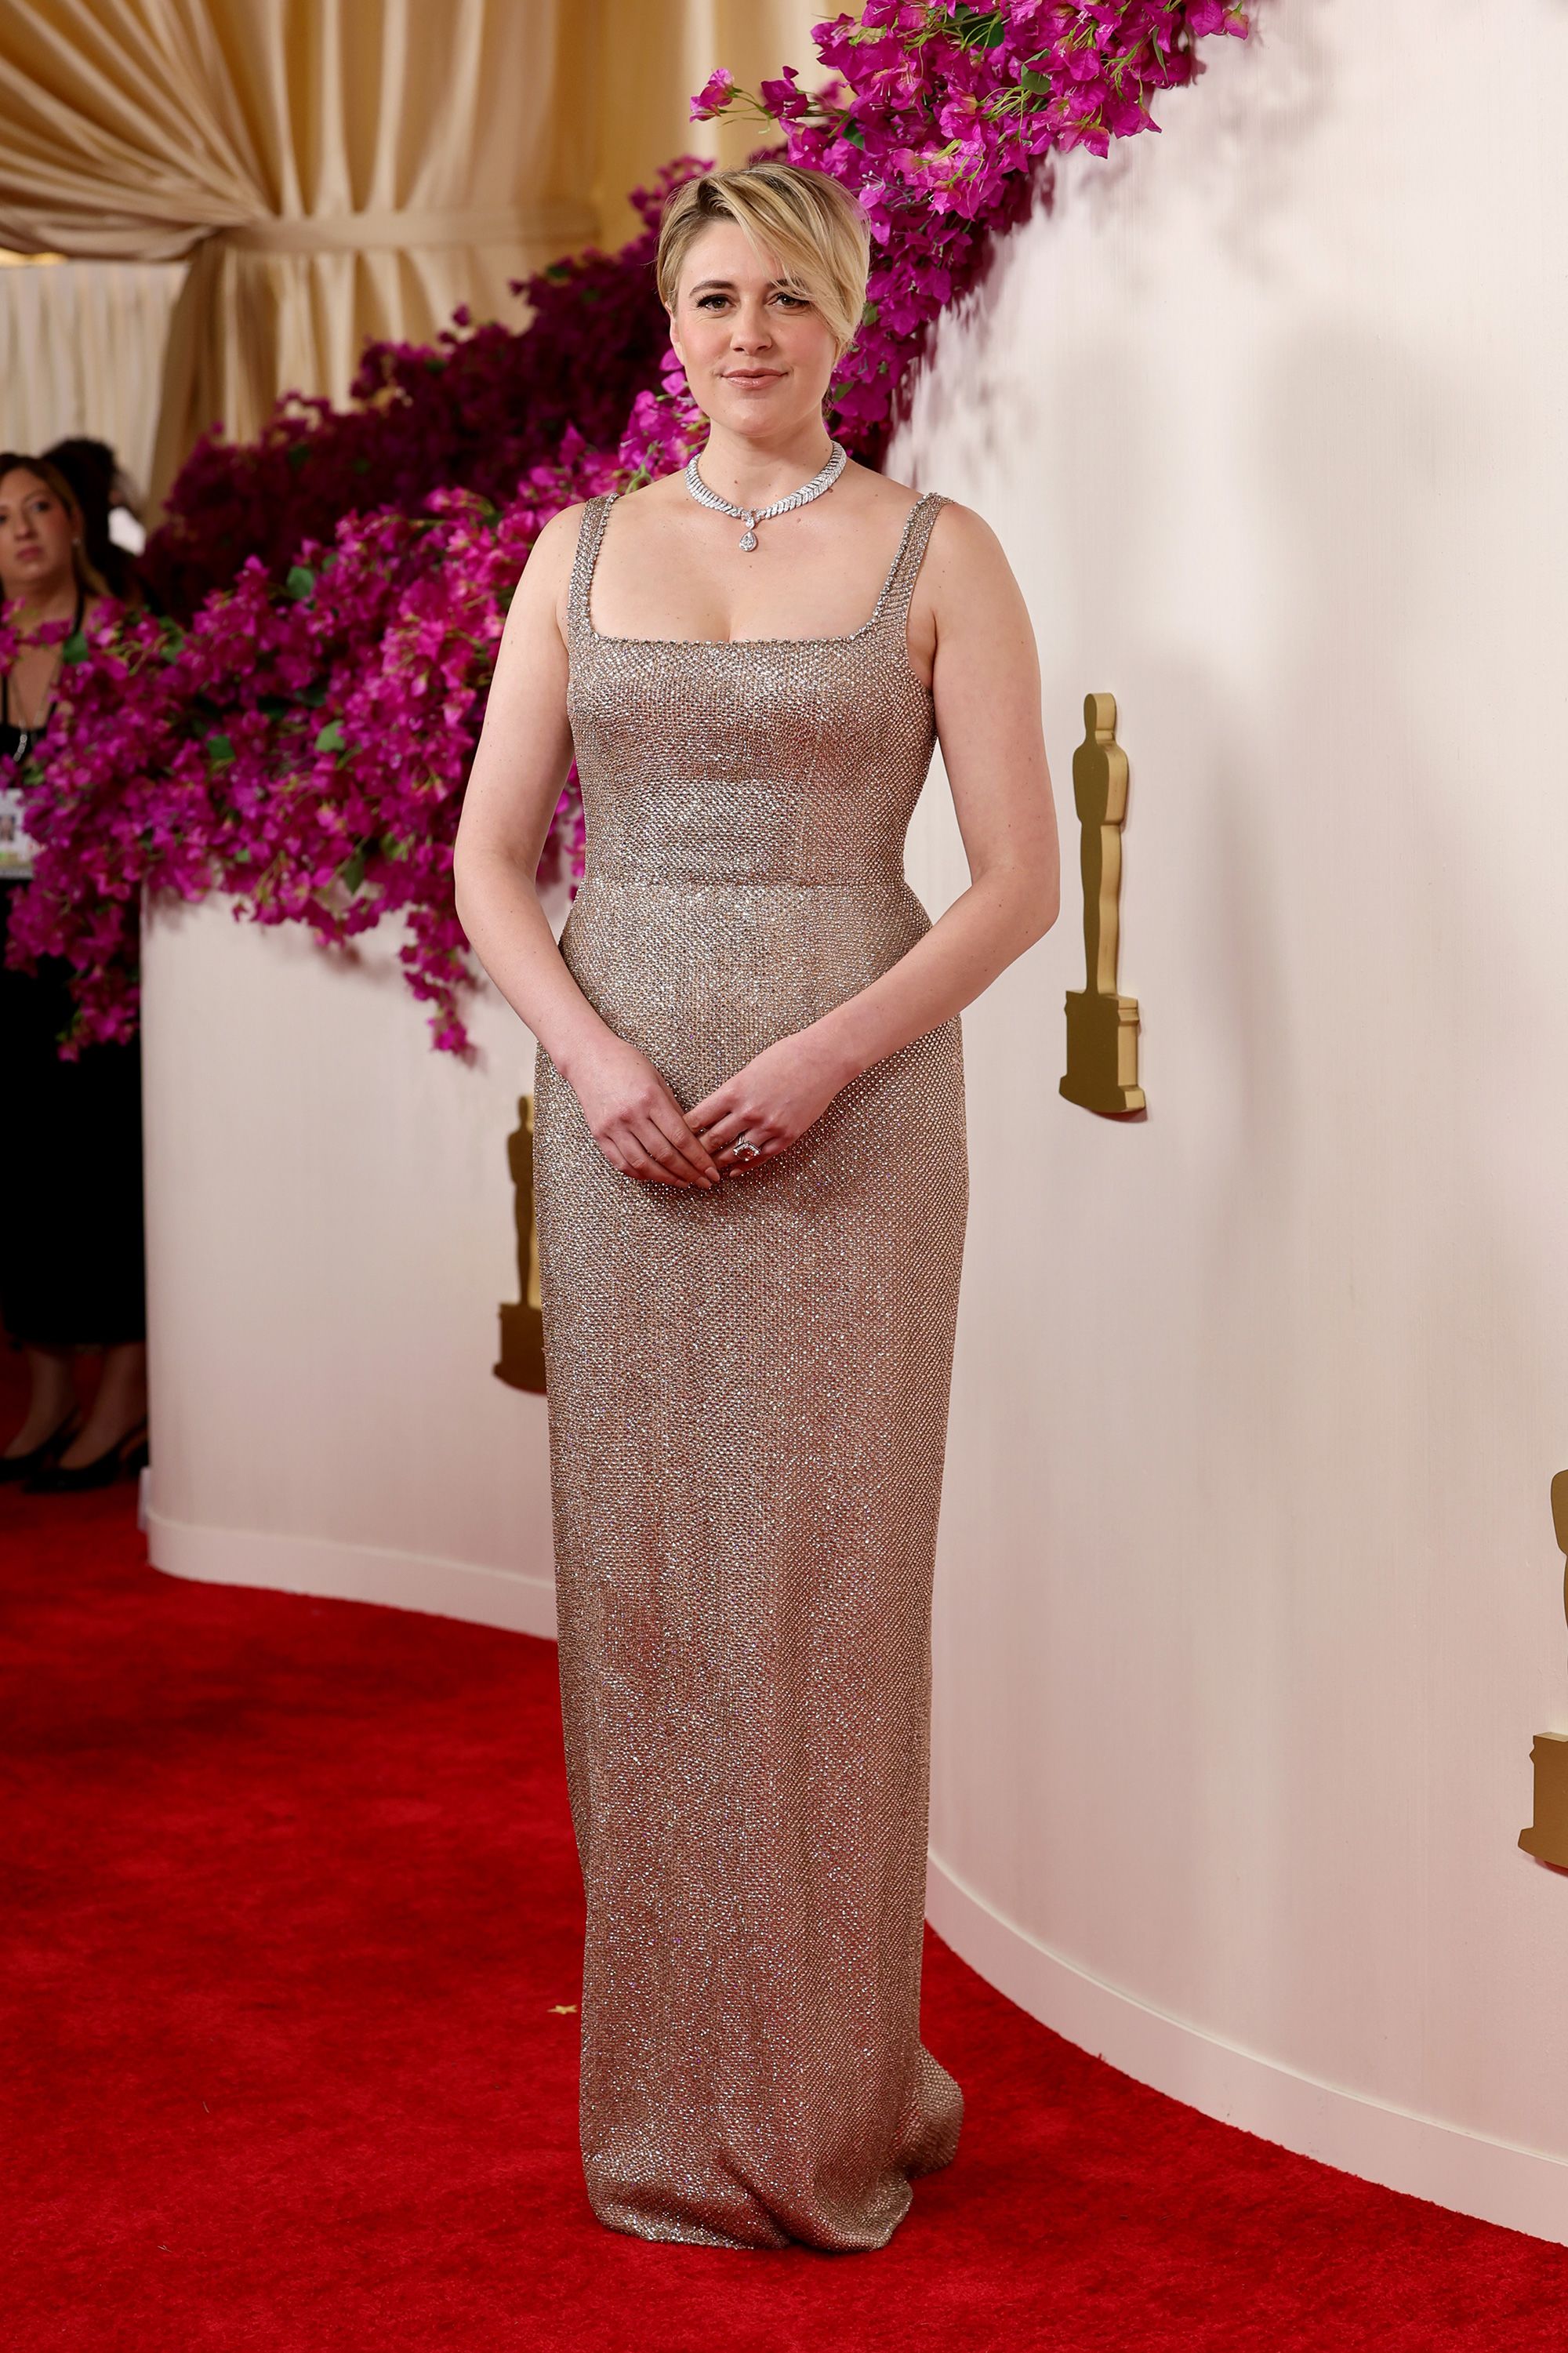 Director of the Oscar-nominated “Barbie,” Greta Gerwig, dazzled in a champagne-colored Gucci gown and a diamond-encrusted Boucheron necklace.